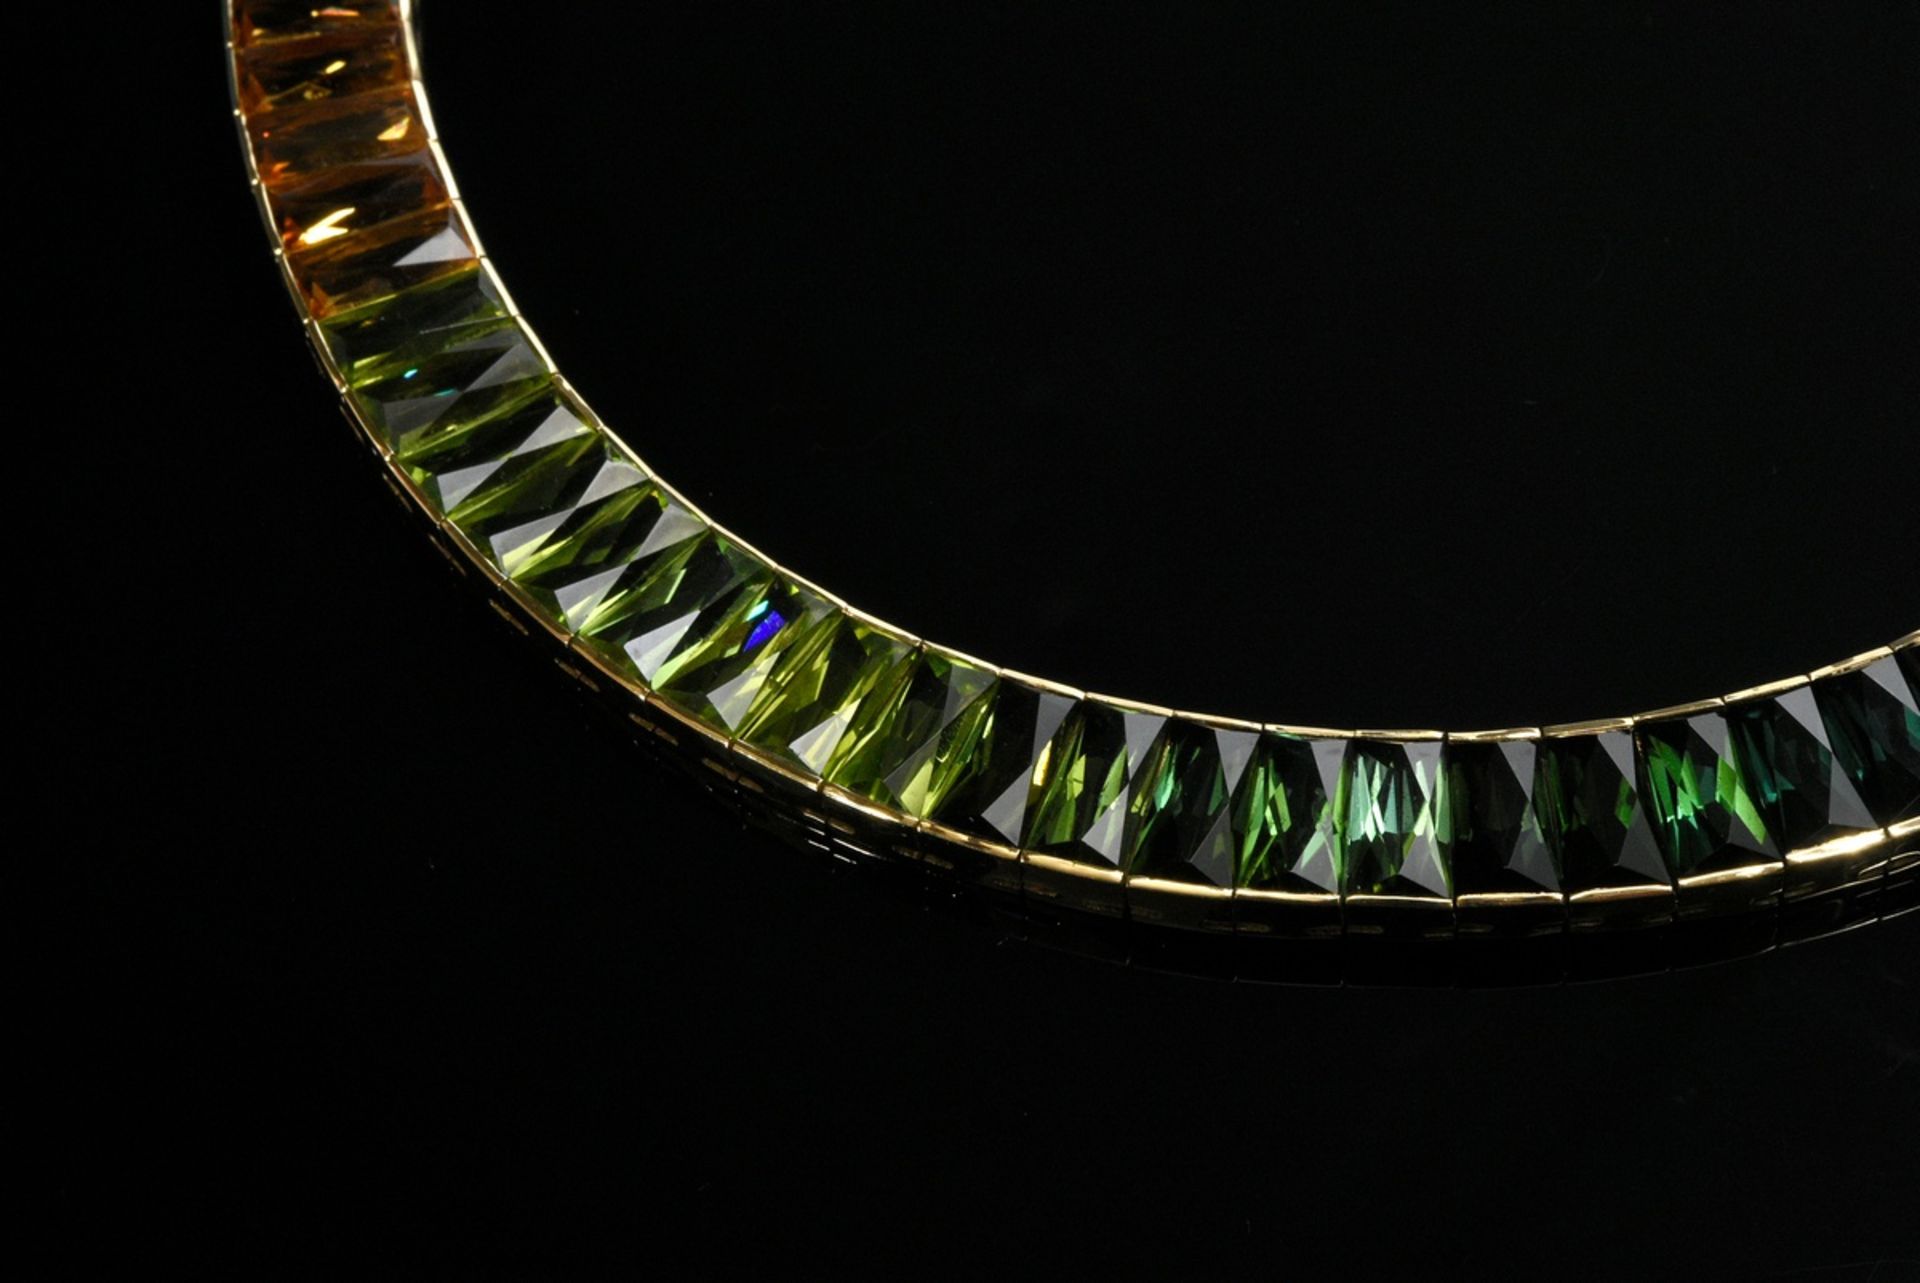 Hans Stern yellow gold 750 "Rainbow" necklace with 77 coloured gemstones (amethysts, topazes, tourm - Image 4 of 7